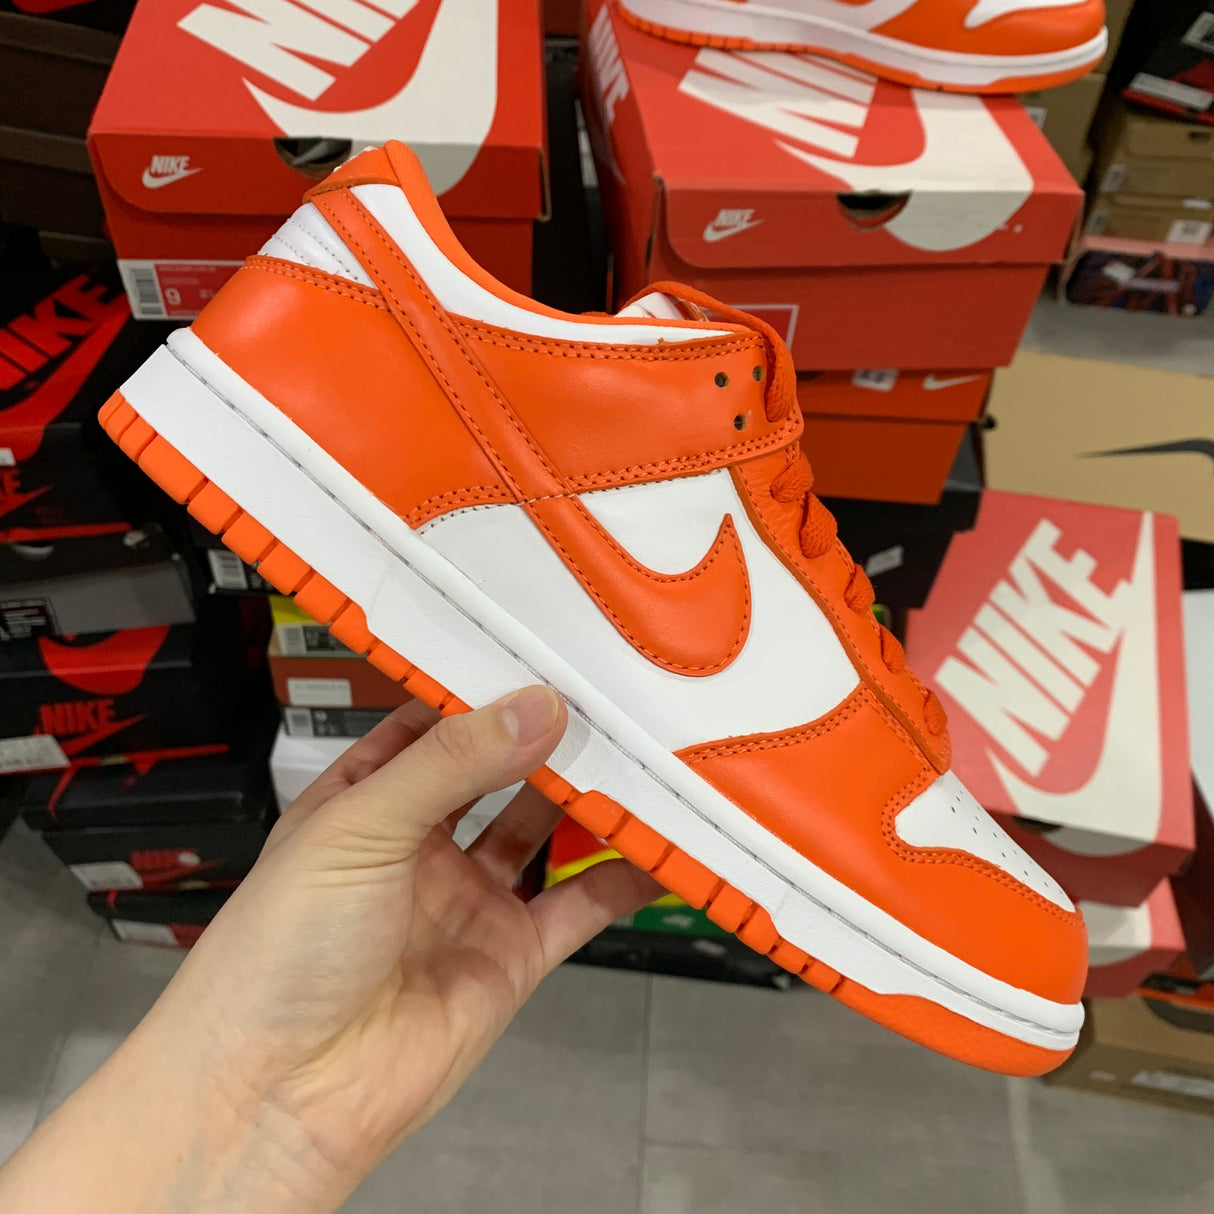 Nike Dunk Low "Syracuse" - Jersey and Sneakers